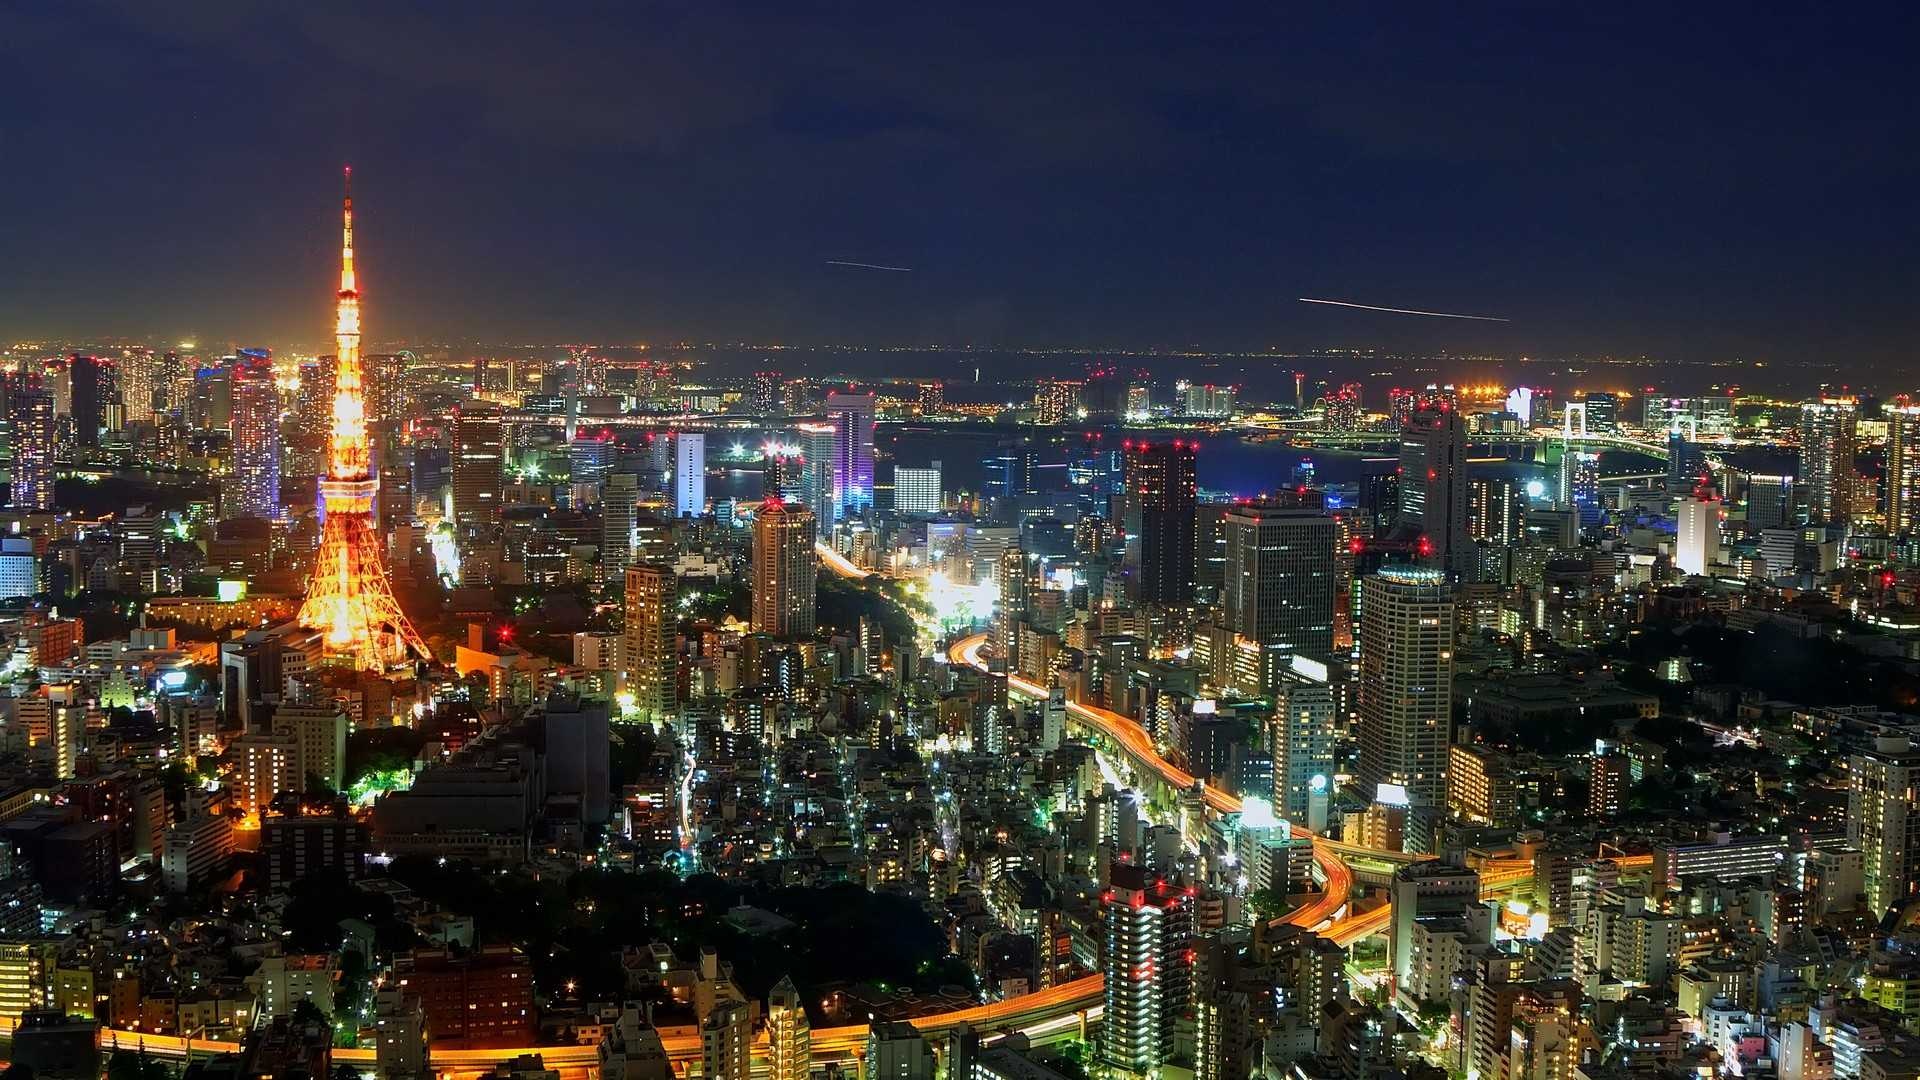 Tokyo city wallpapers, Japanese skyline, Urban scenery, High-quality images, 1920x1080 Full HD Desktop